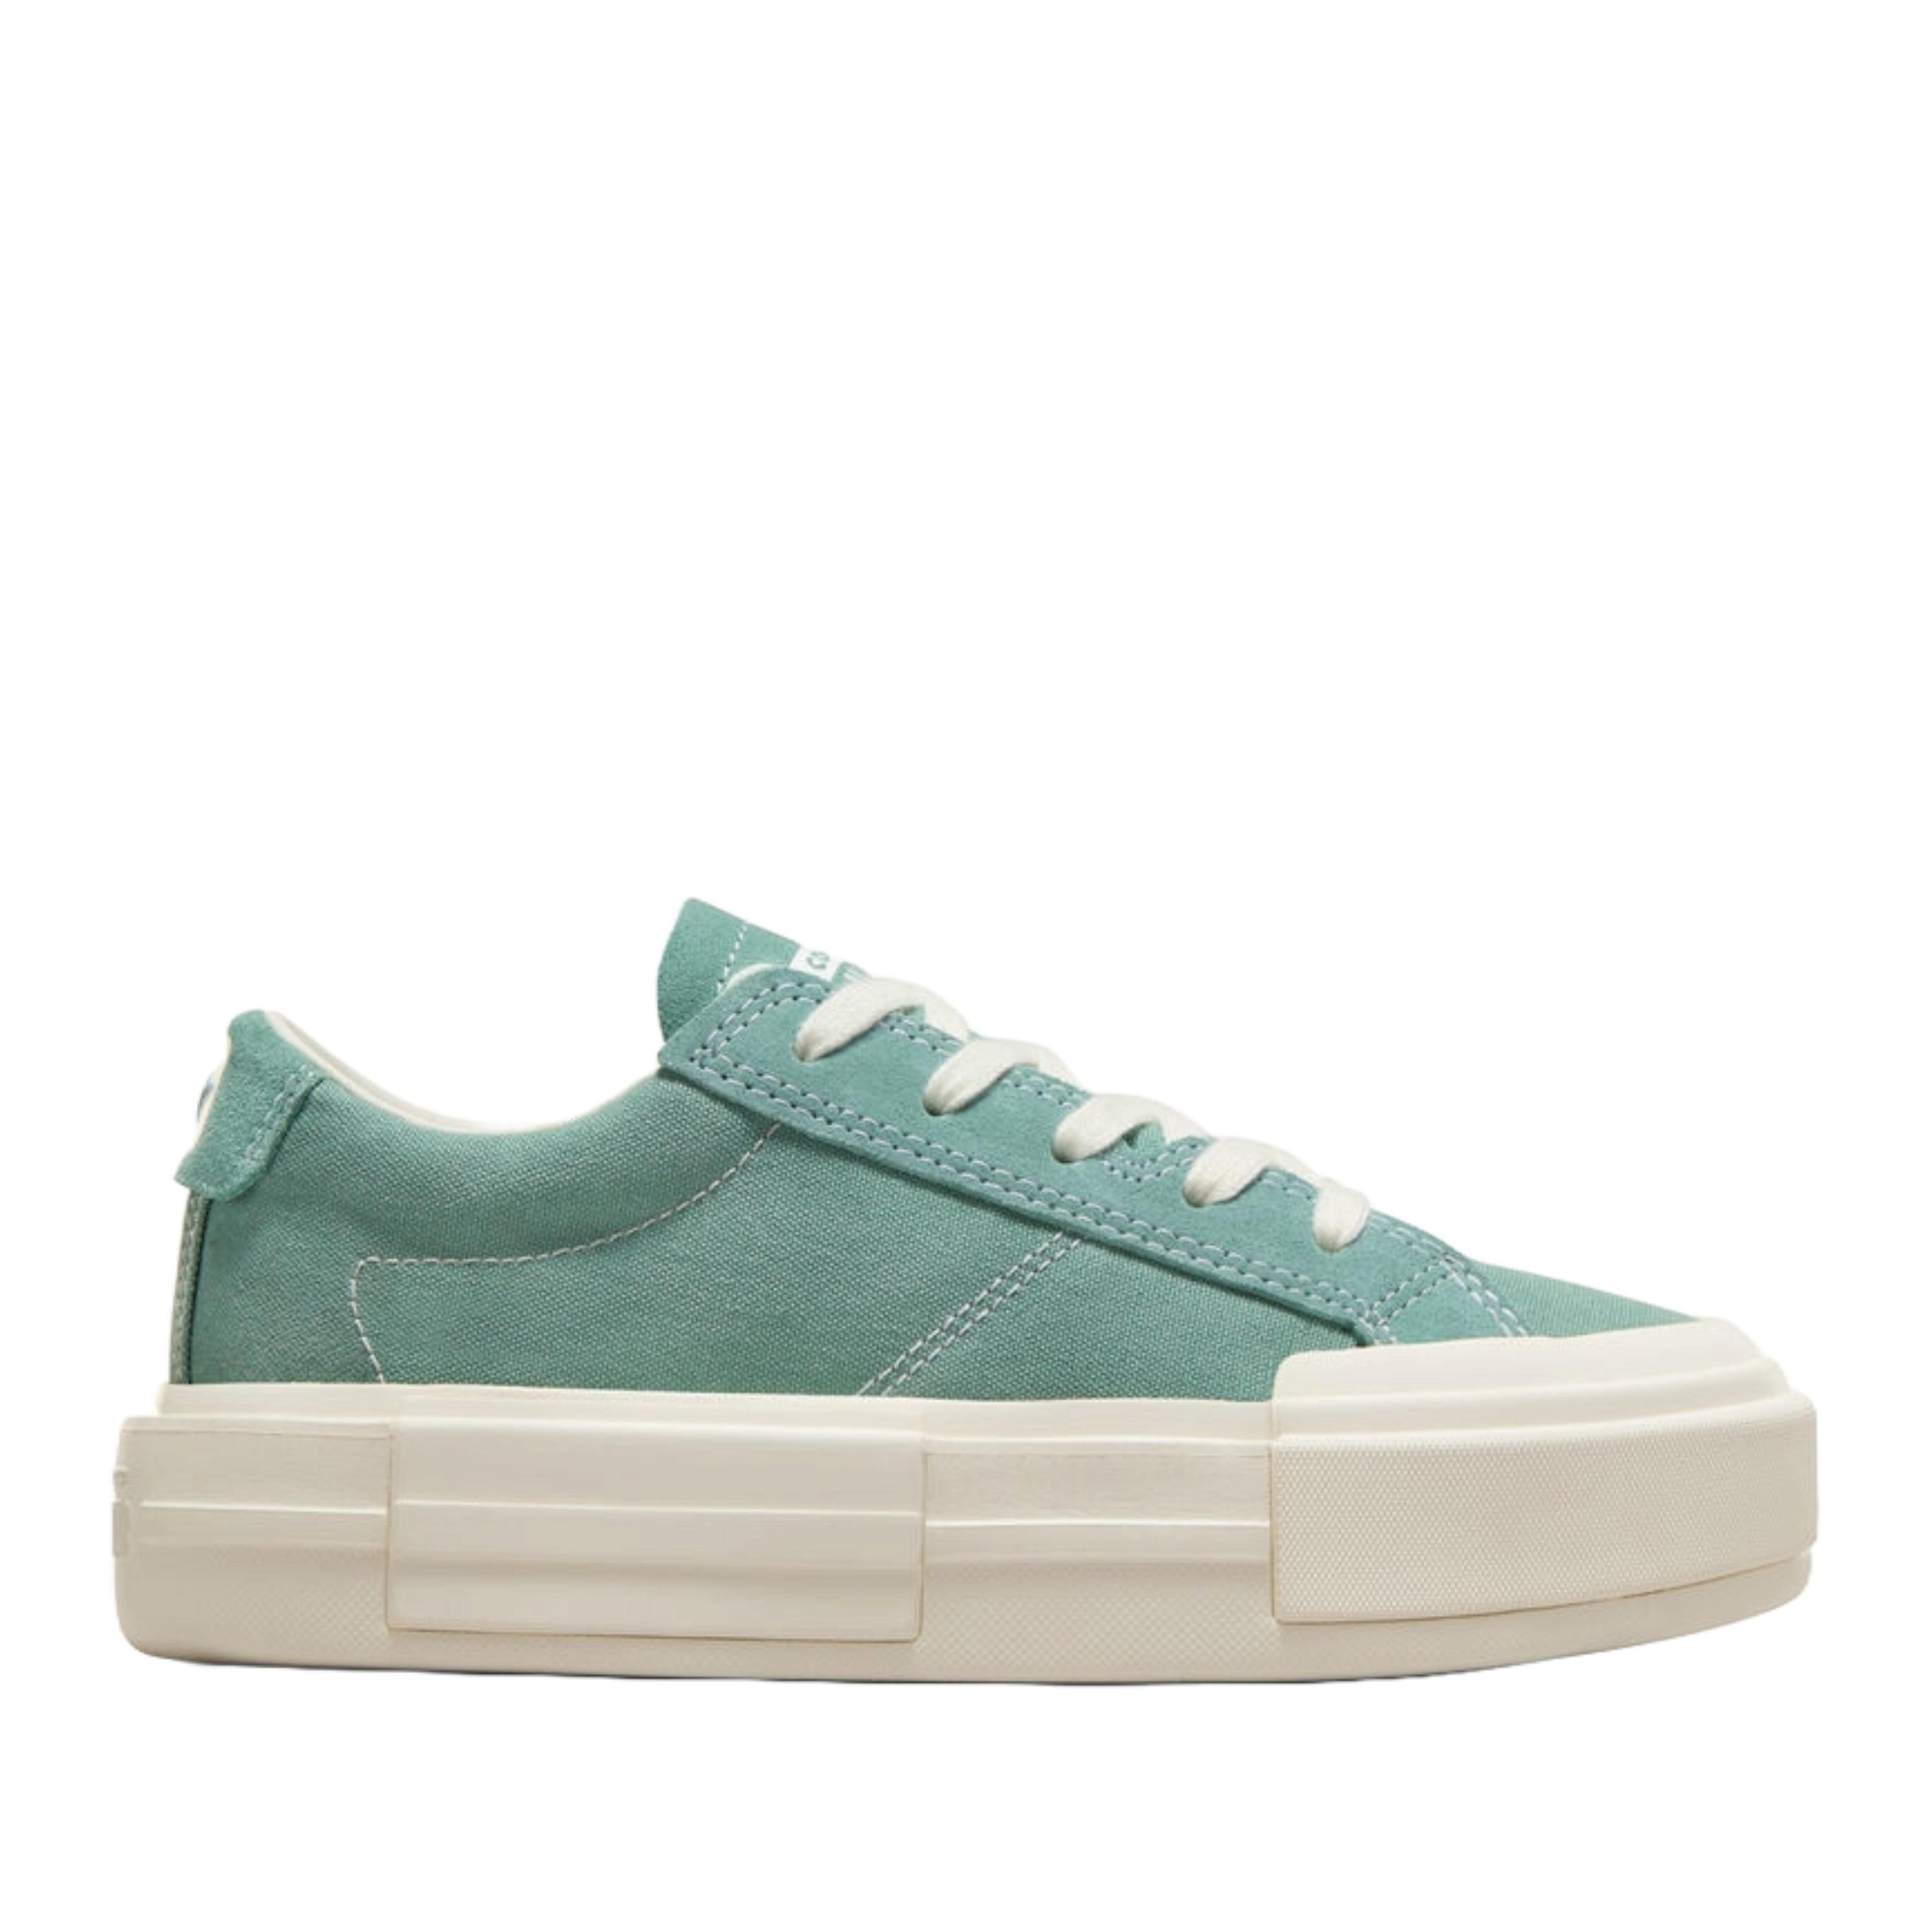 Converse - Chuck Taylor All Star Cruise - (Apple Green) by CONVERSE